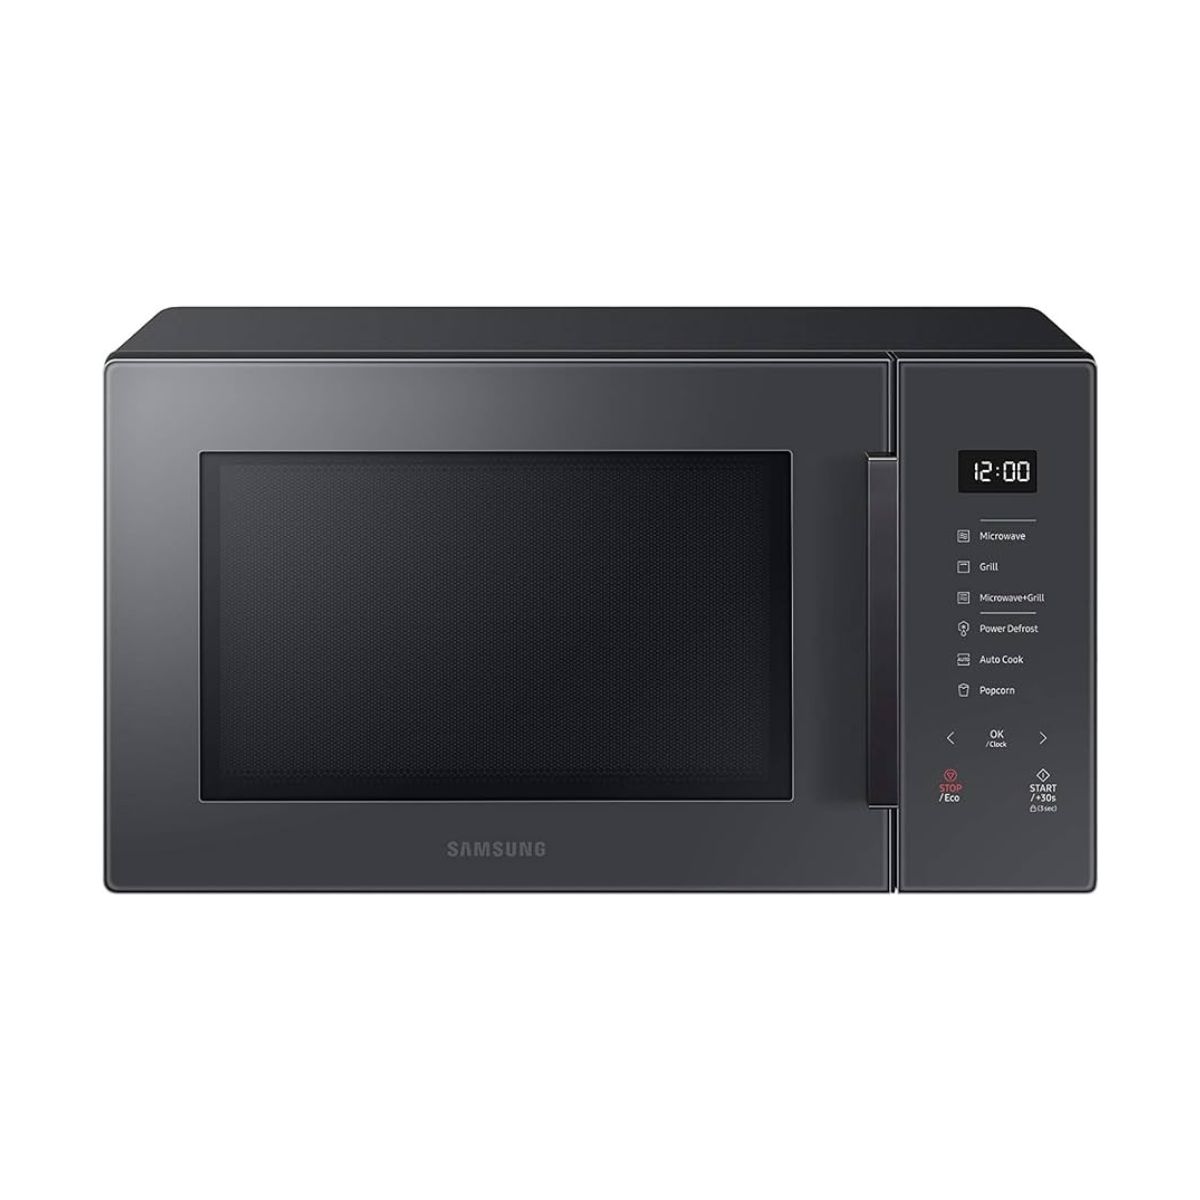 How To Fix The Error Code C-31 For Samsung Induction Range